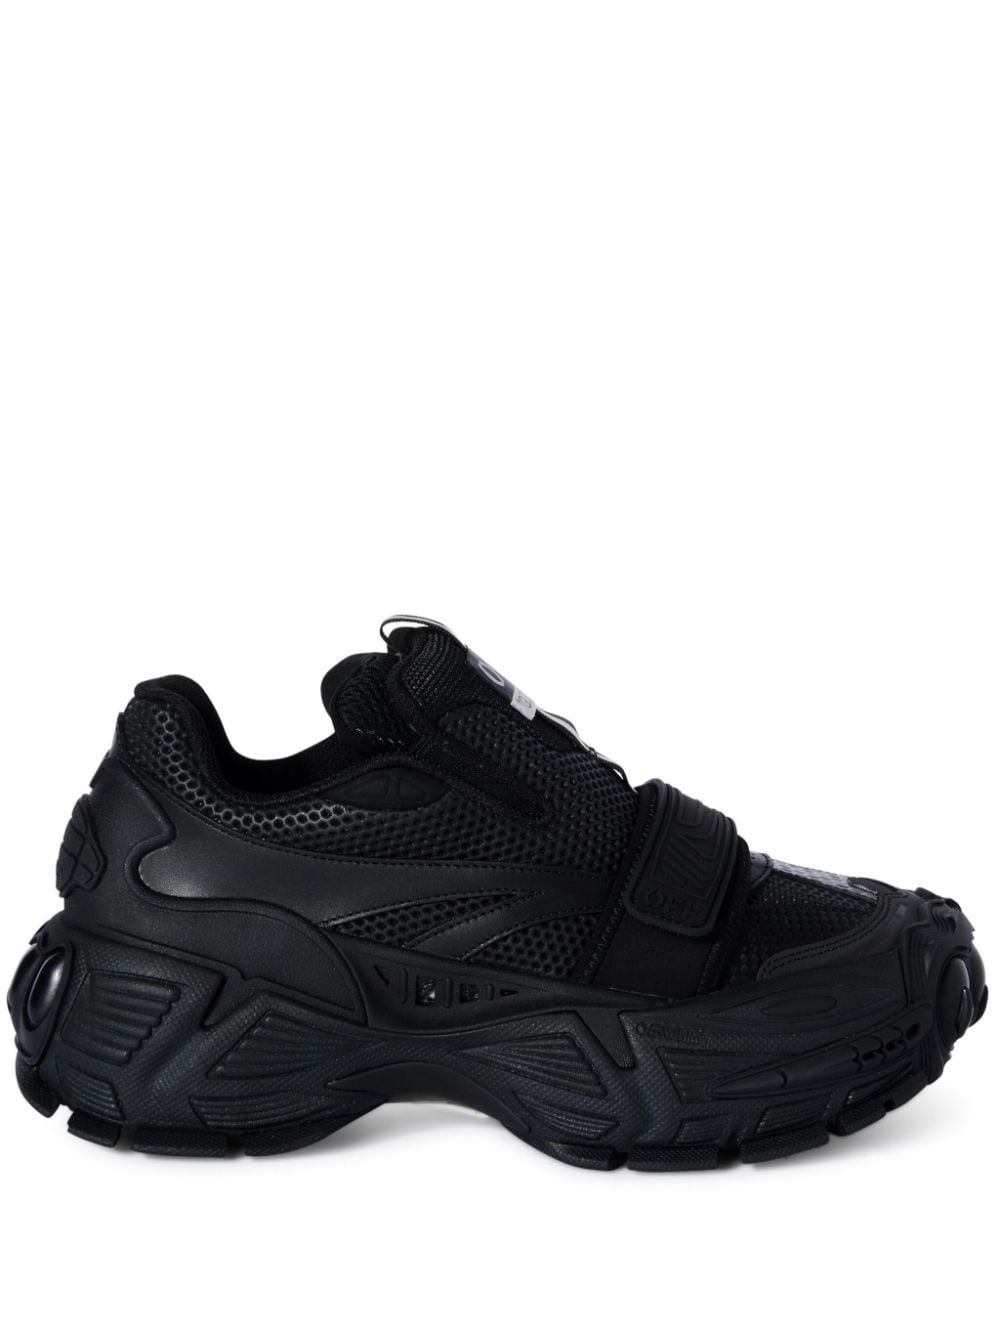 Off-White Glove panelled chunky sneakers - Black von Off-White